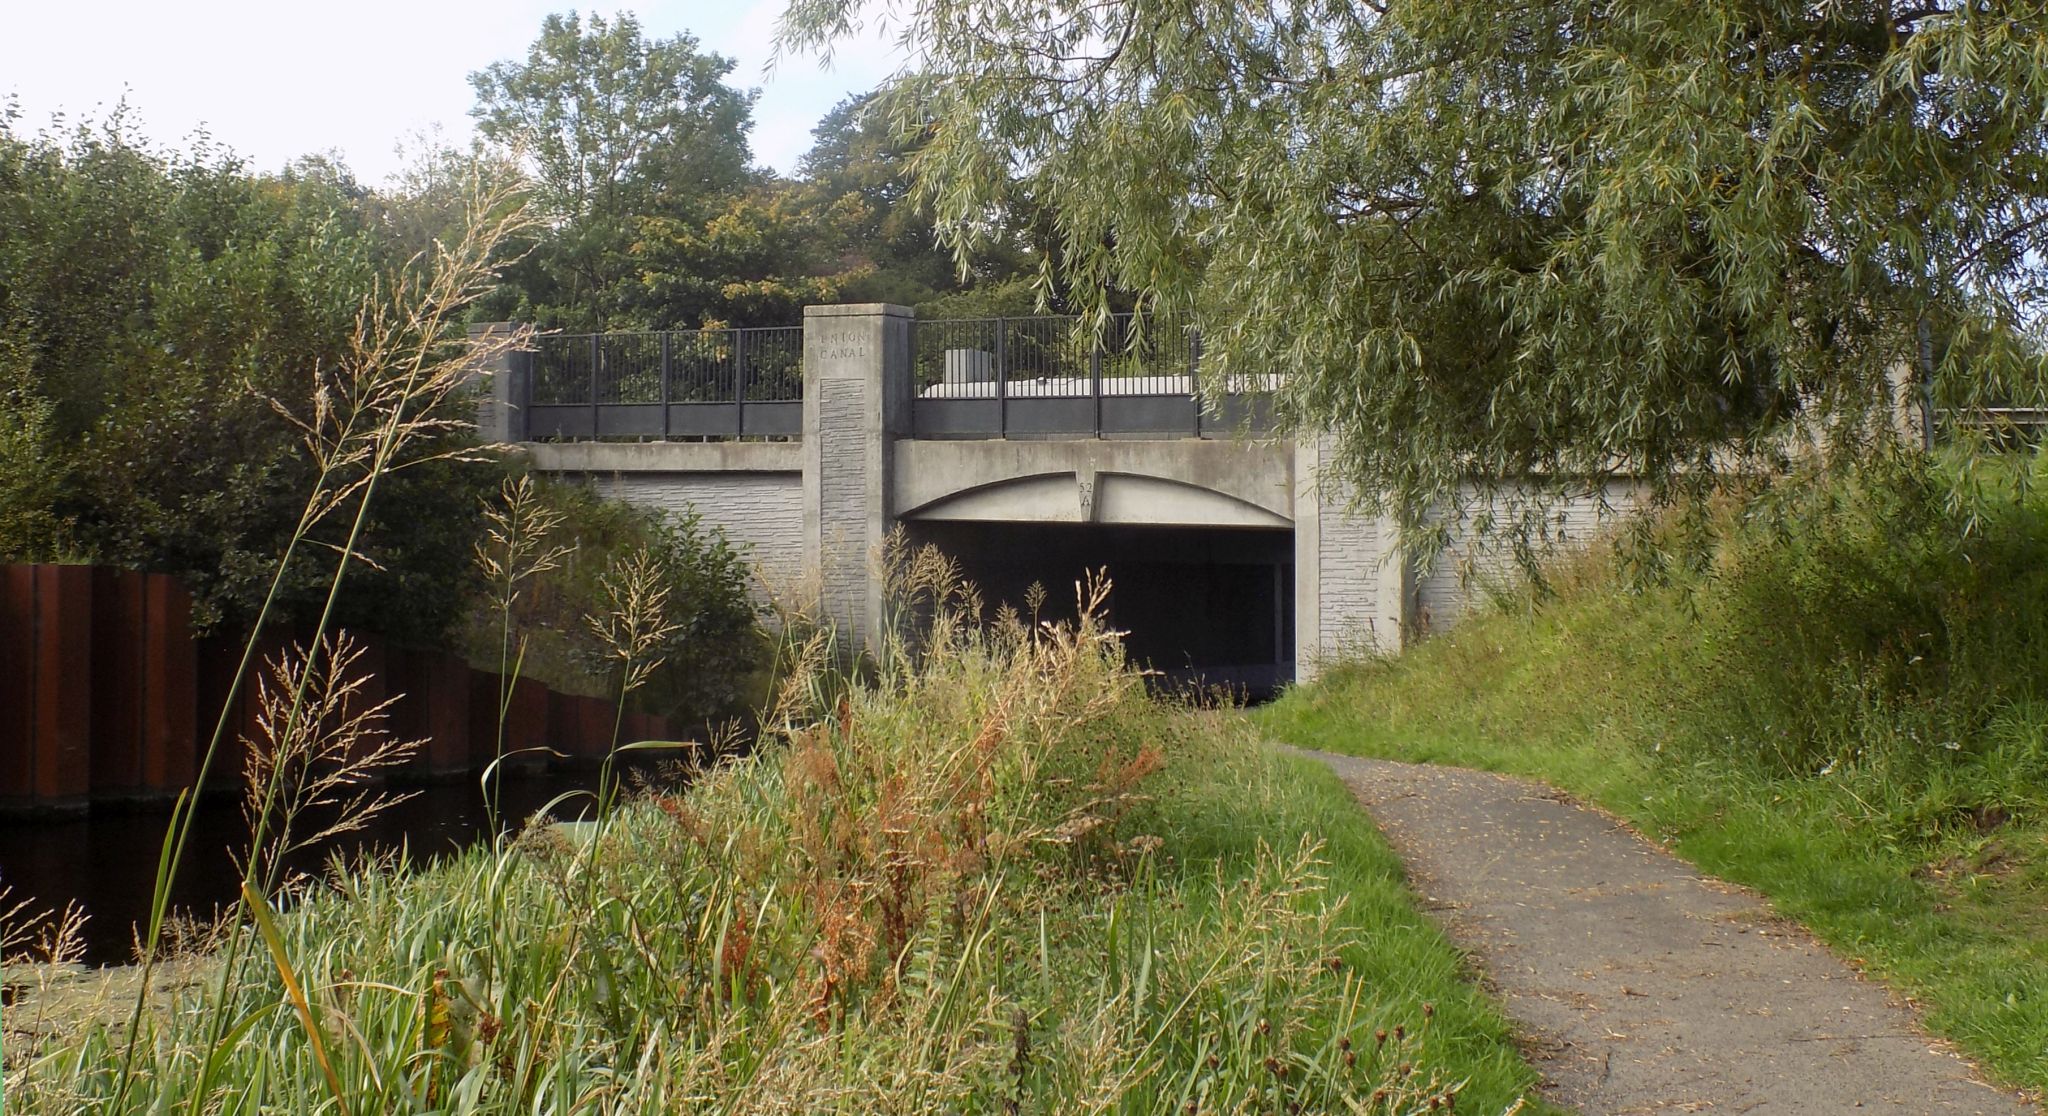 A801 Road Bridge over the Union Canal between Falkirk and Linlithgow